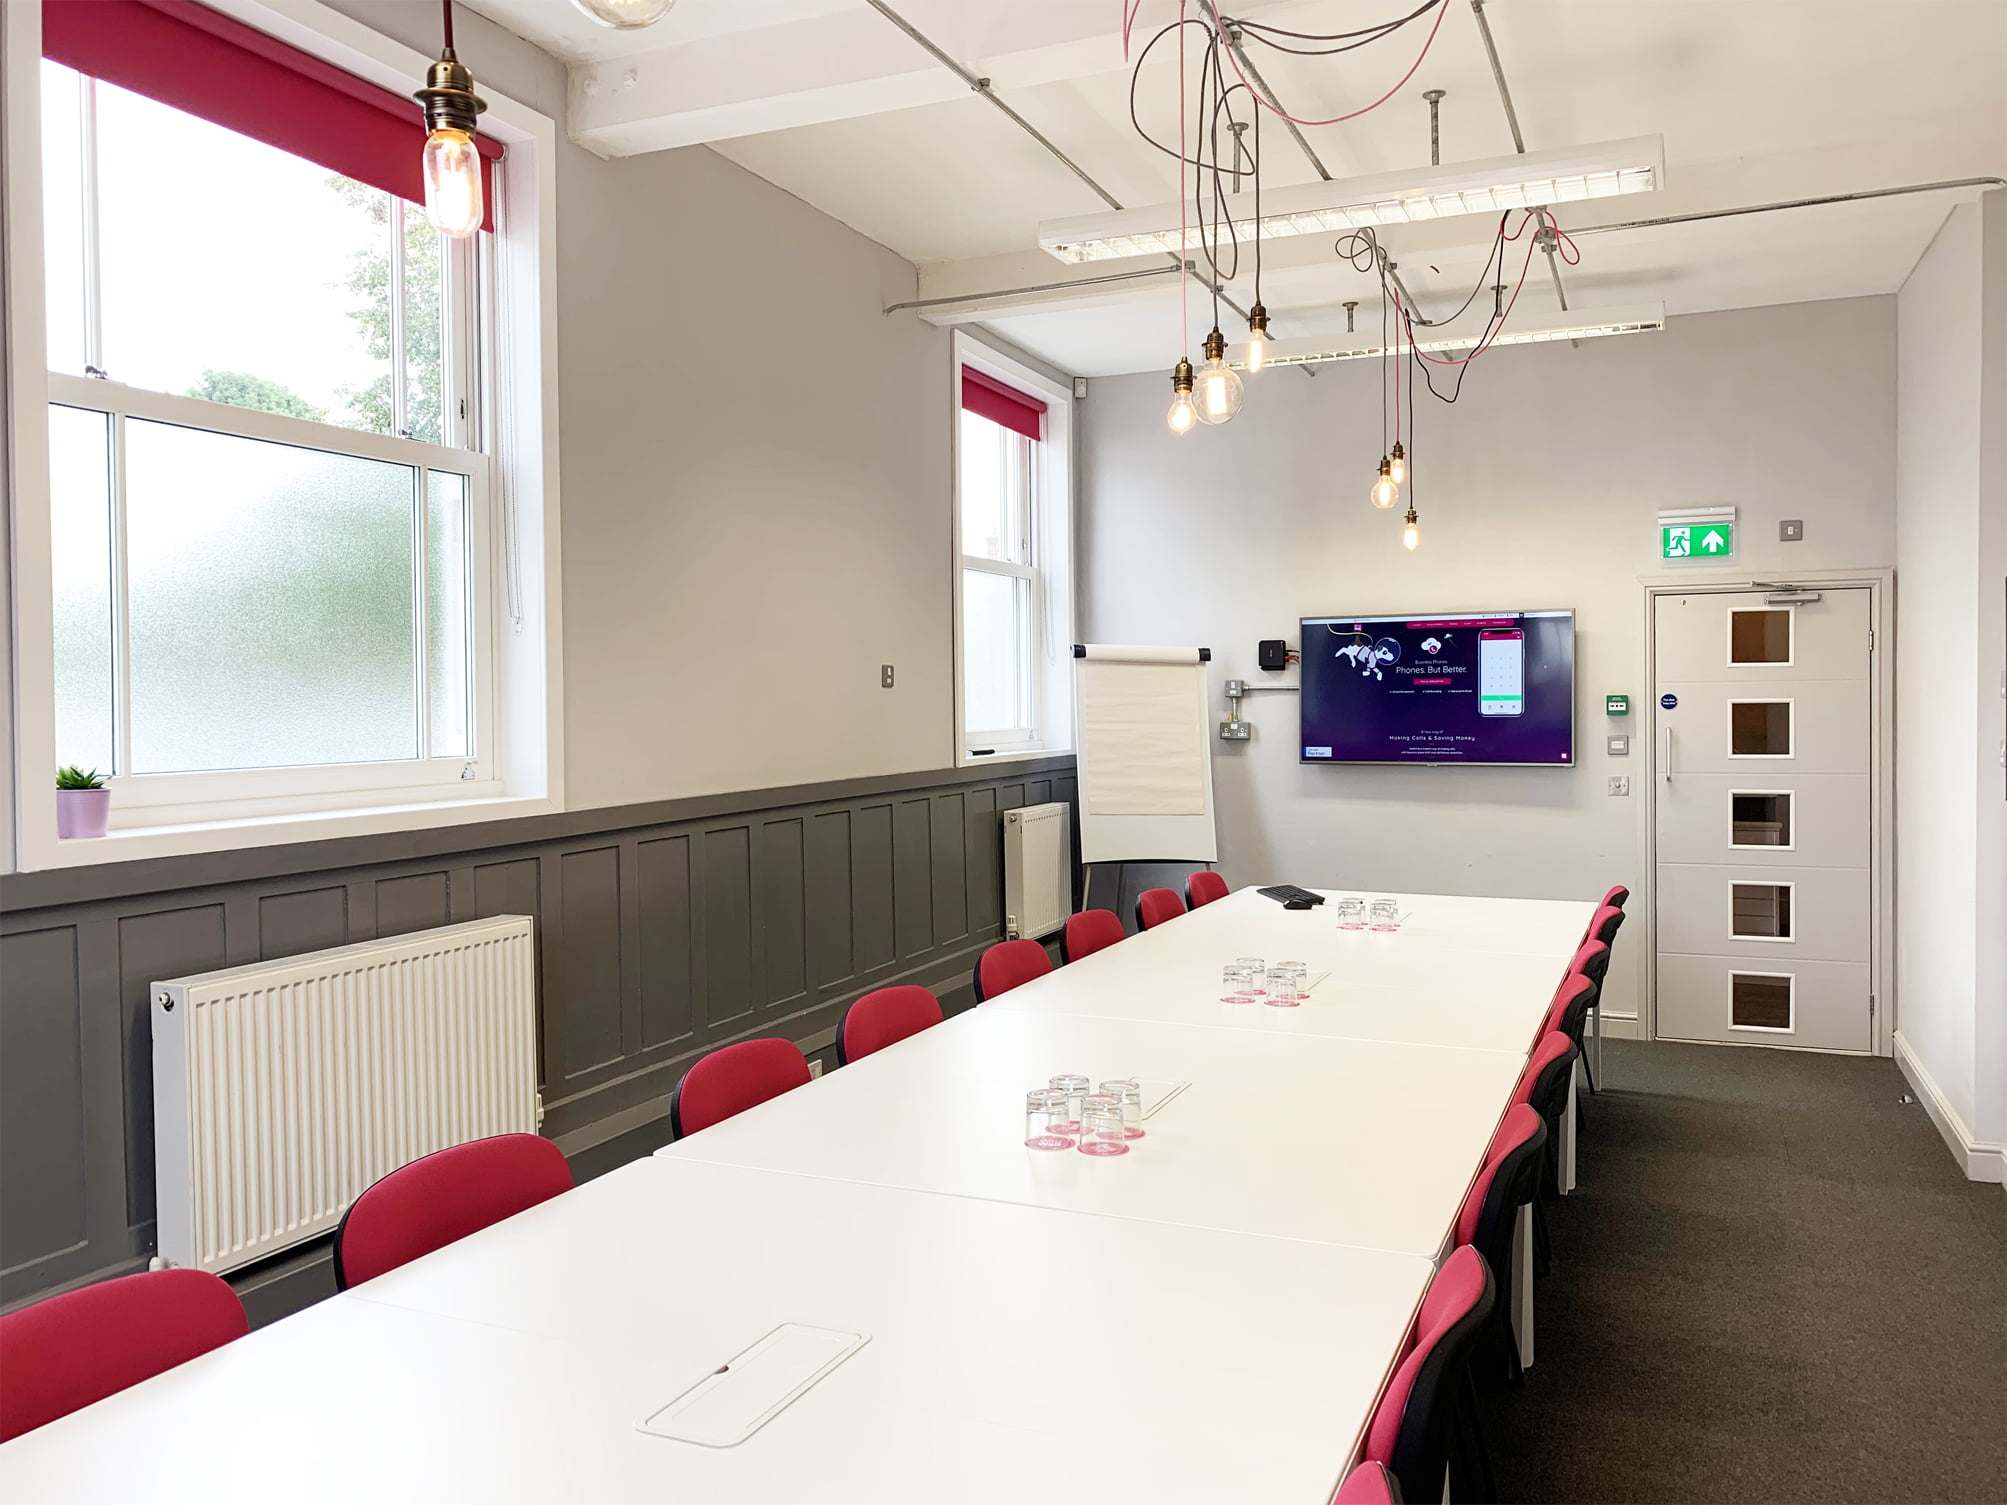 Meeting Rooms For Evening Hire